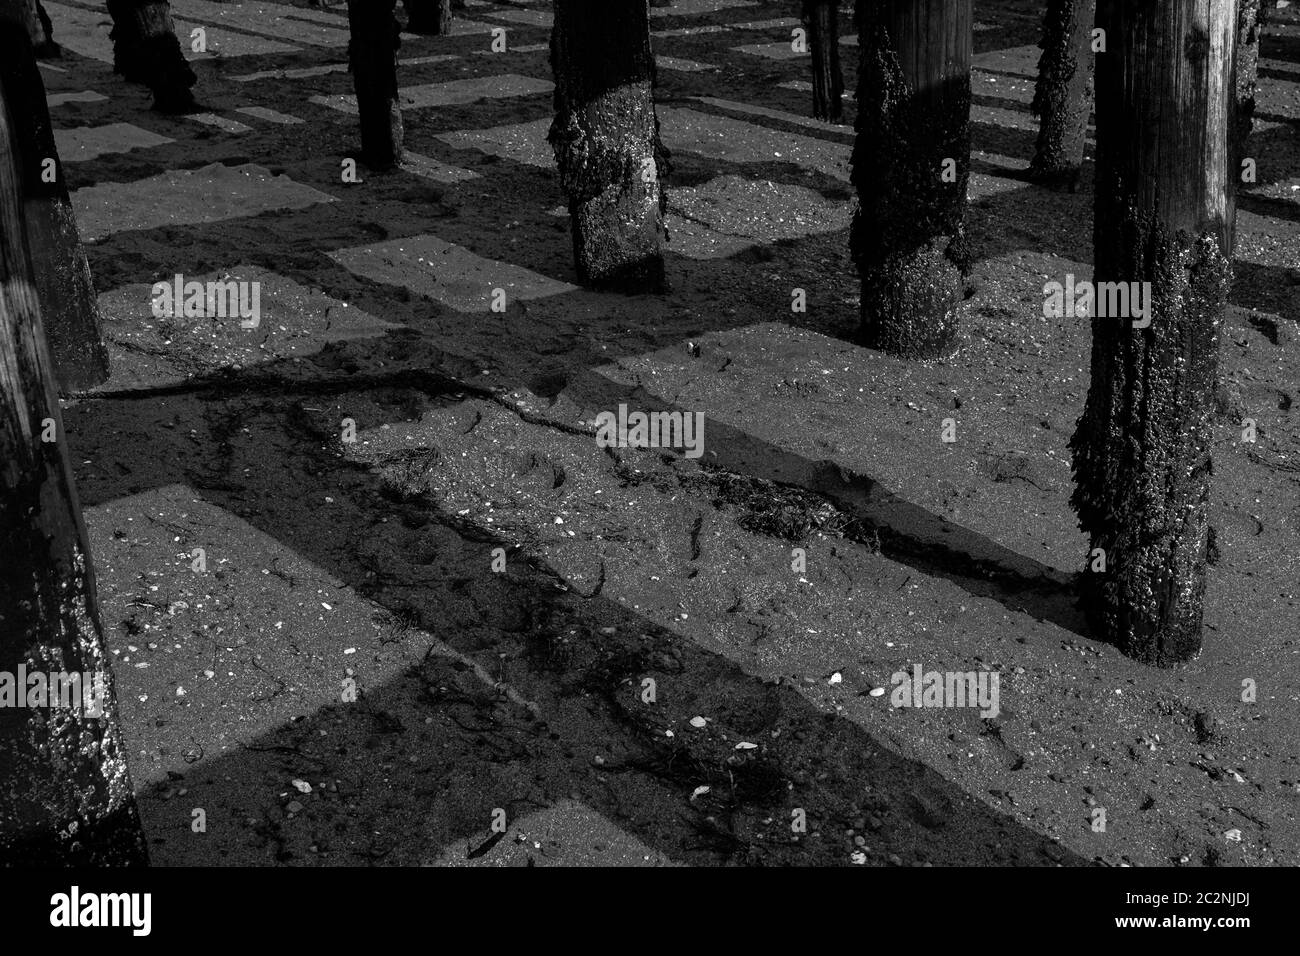 Abstract square patterns of shadows of wharf posts on sand below in black and white. Stock Photo